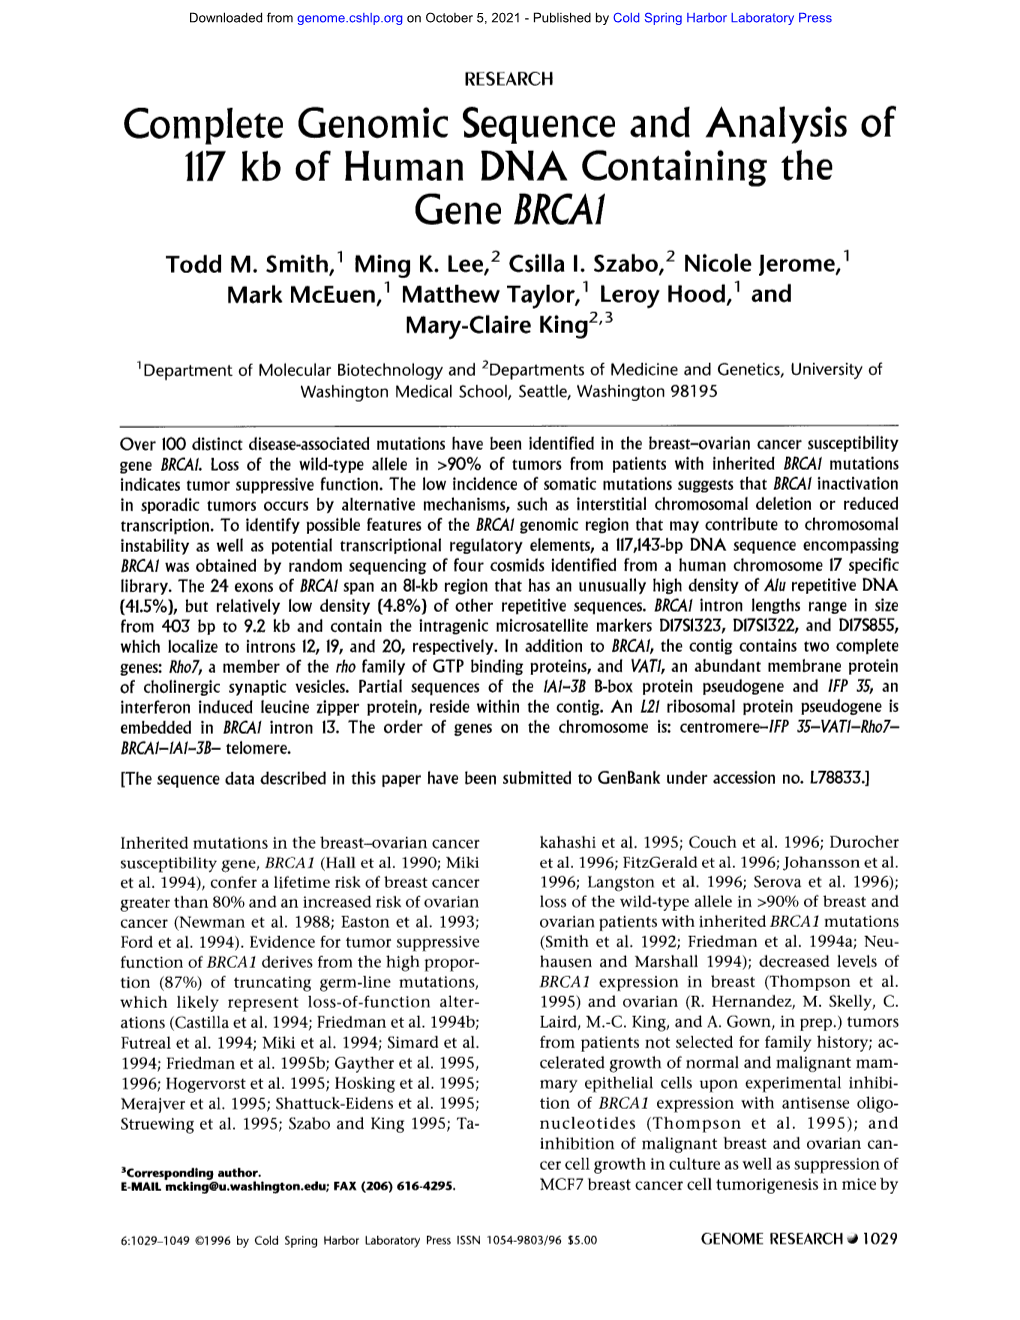 Complete Genomic Sequence and Analysis of 117 Kb of Human DNA Containing the Gene BRCAI Todd M